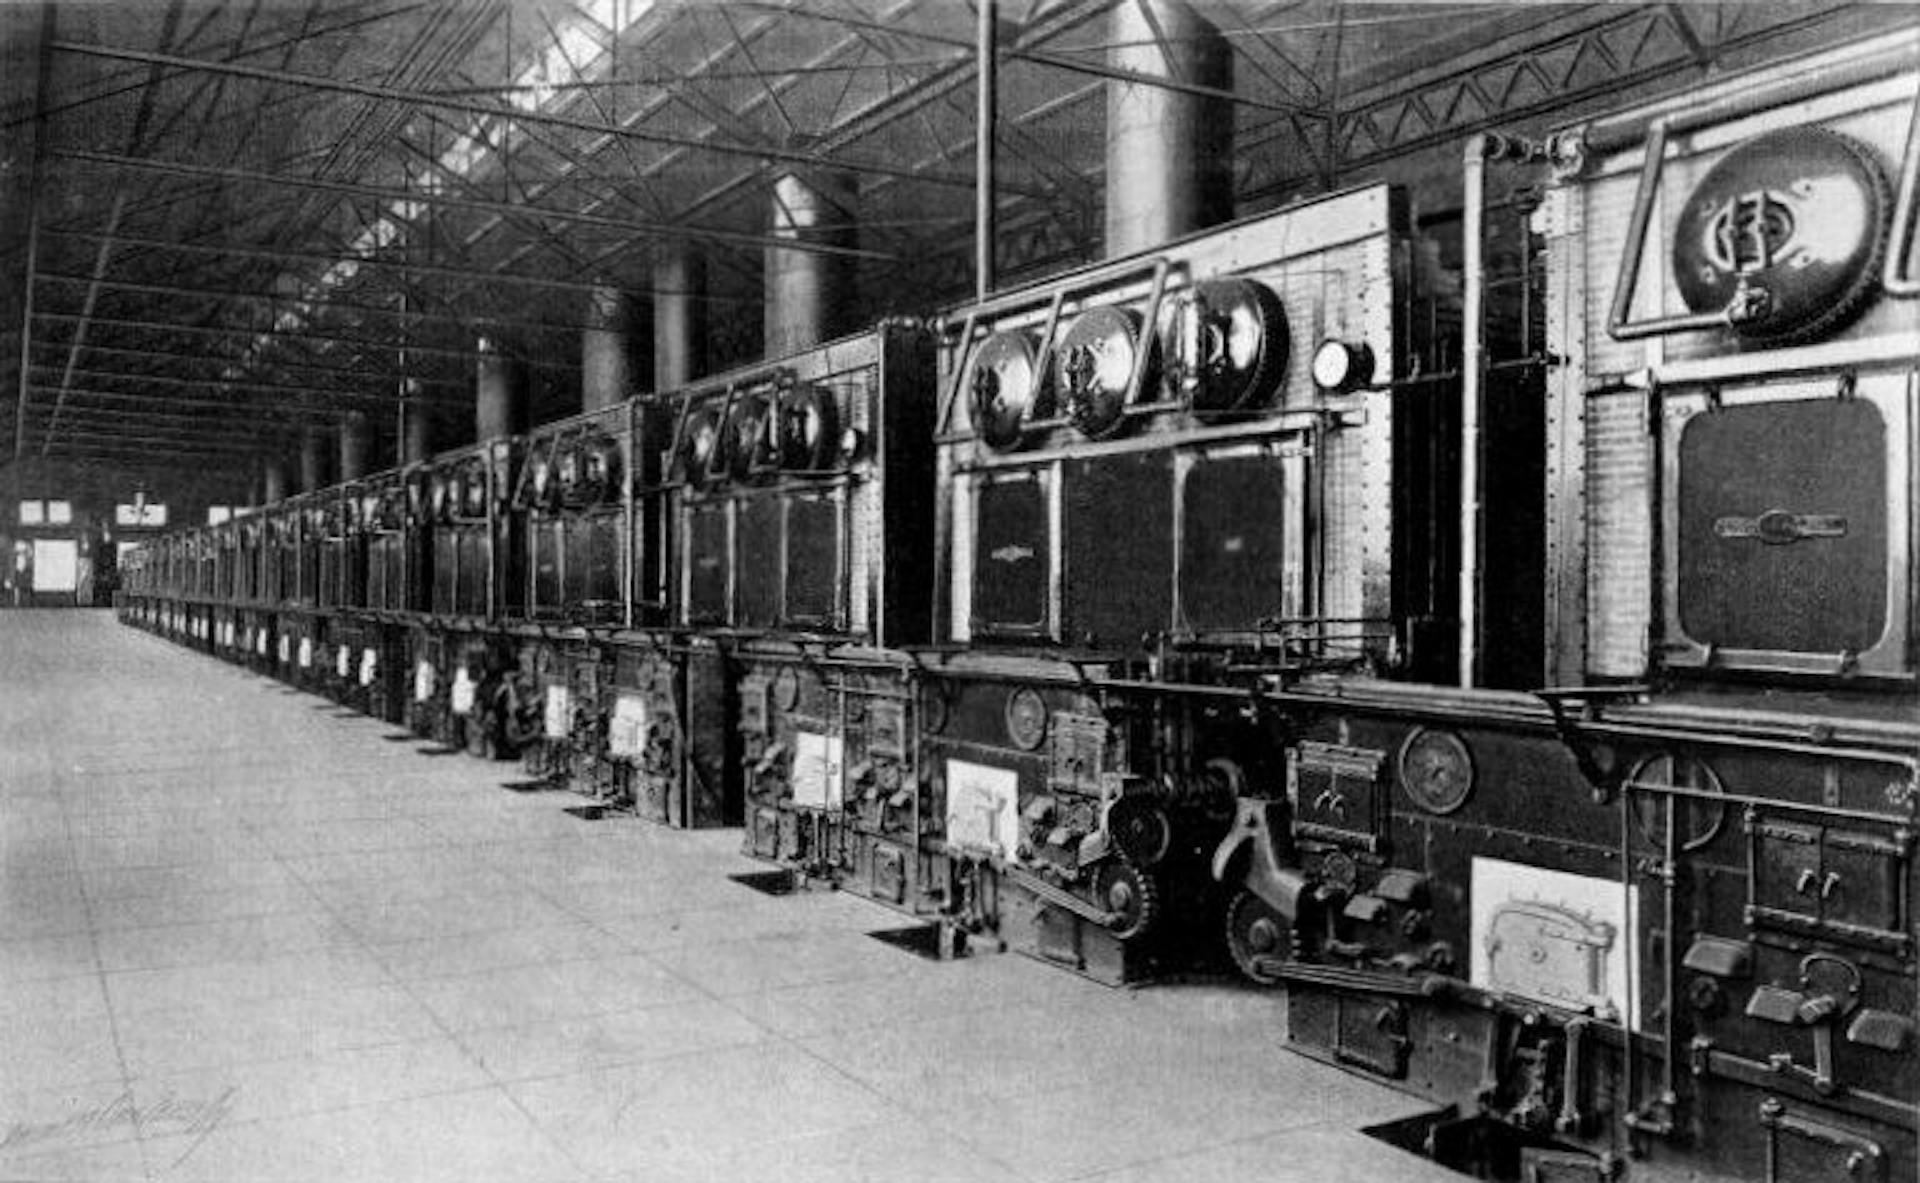 16,000 Horse-power Installation of Babcock & Wilcox Boilers and Superheaters at the Brunot’s Island Plant of the Duquesne Light Co., Pittsburgh, Pa.